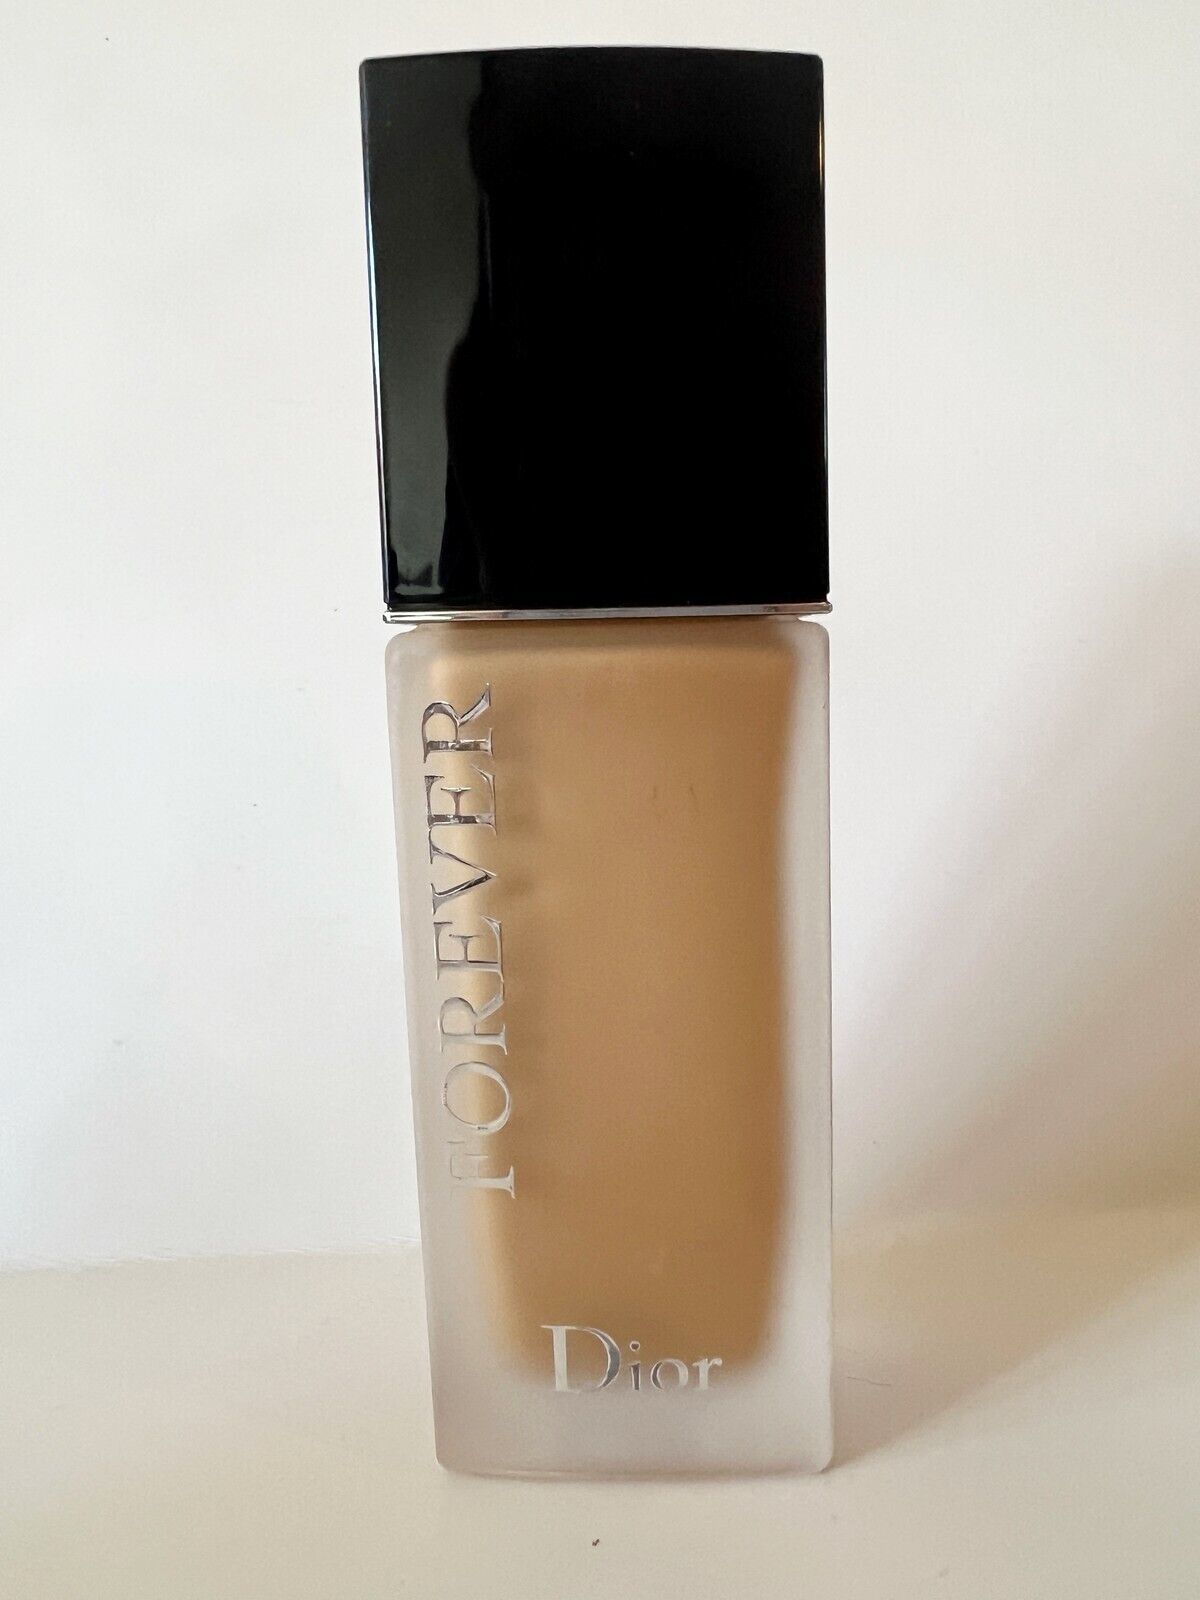 Primary image for Christian Dior 24h wear high perfection skin caring foundation "4W0" 1oz NWOB